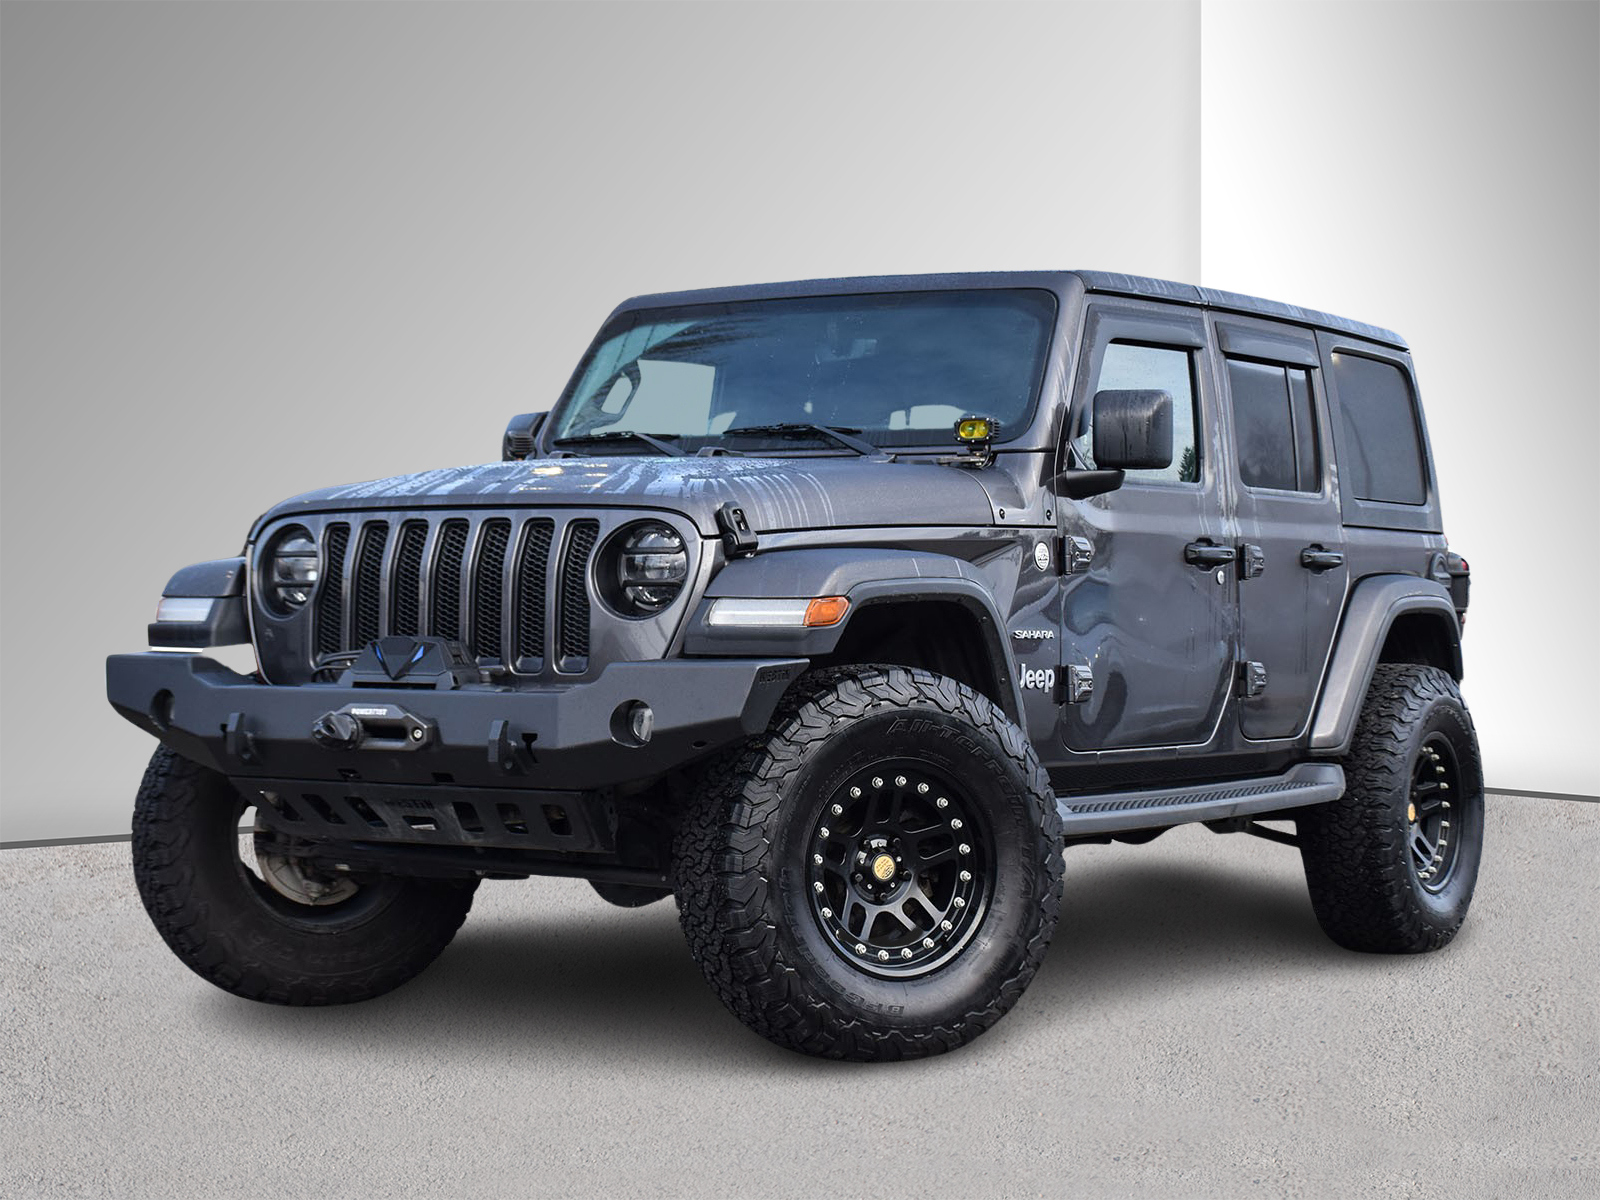 2019 Jeep WRANGLER UNLIMITED Sahara - No Accidents, Leather, Nav, Dual Climate